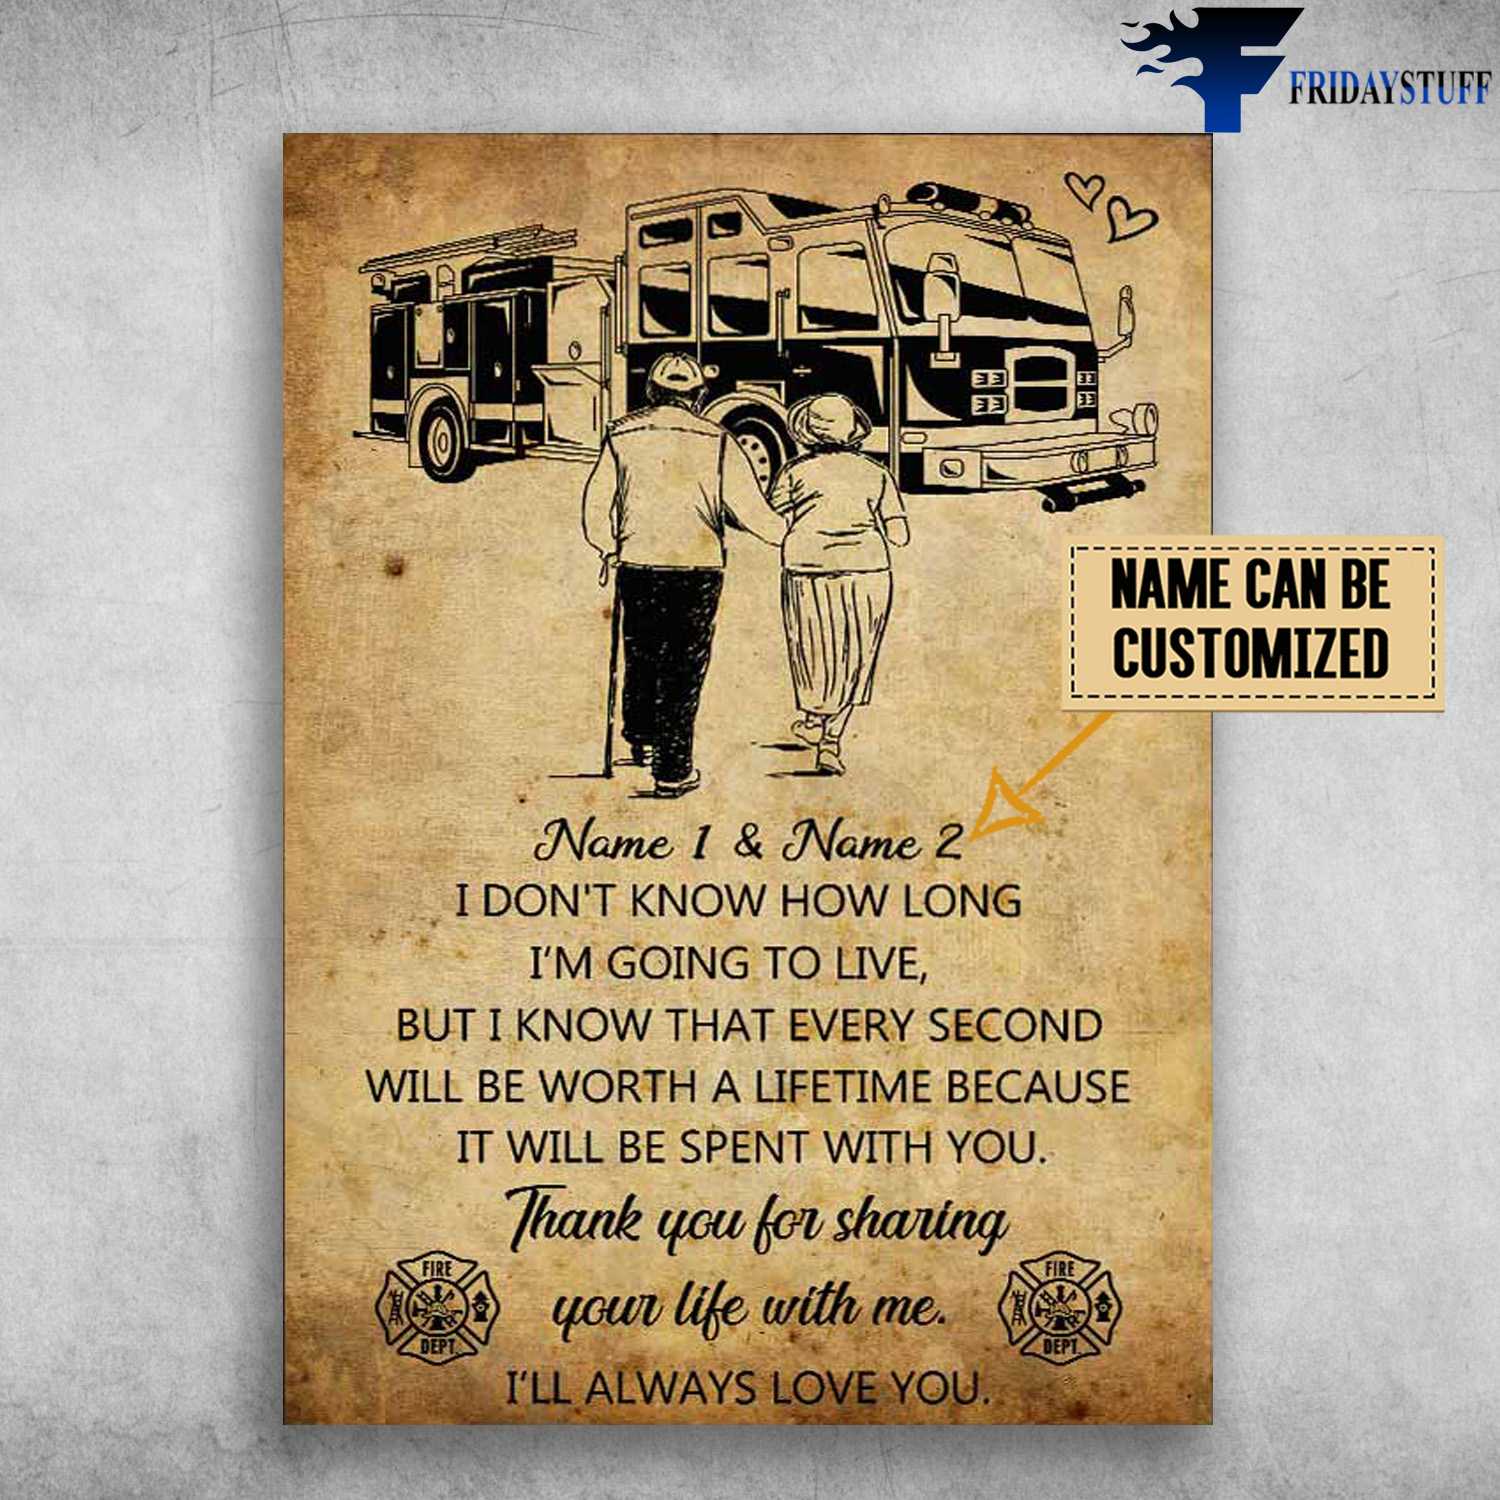 Firefighter Poster, Old Couple Firetruck, I Don't Know How Long, I'm Going To Live, But I Know That Every Second, Will Be Worth A Lifetime, Thank You For Sharing Your Life